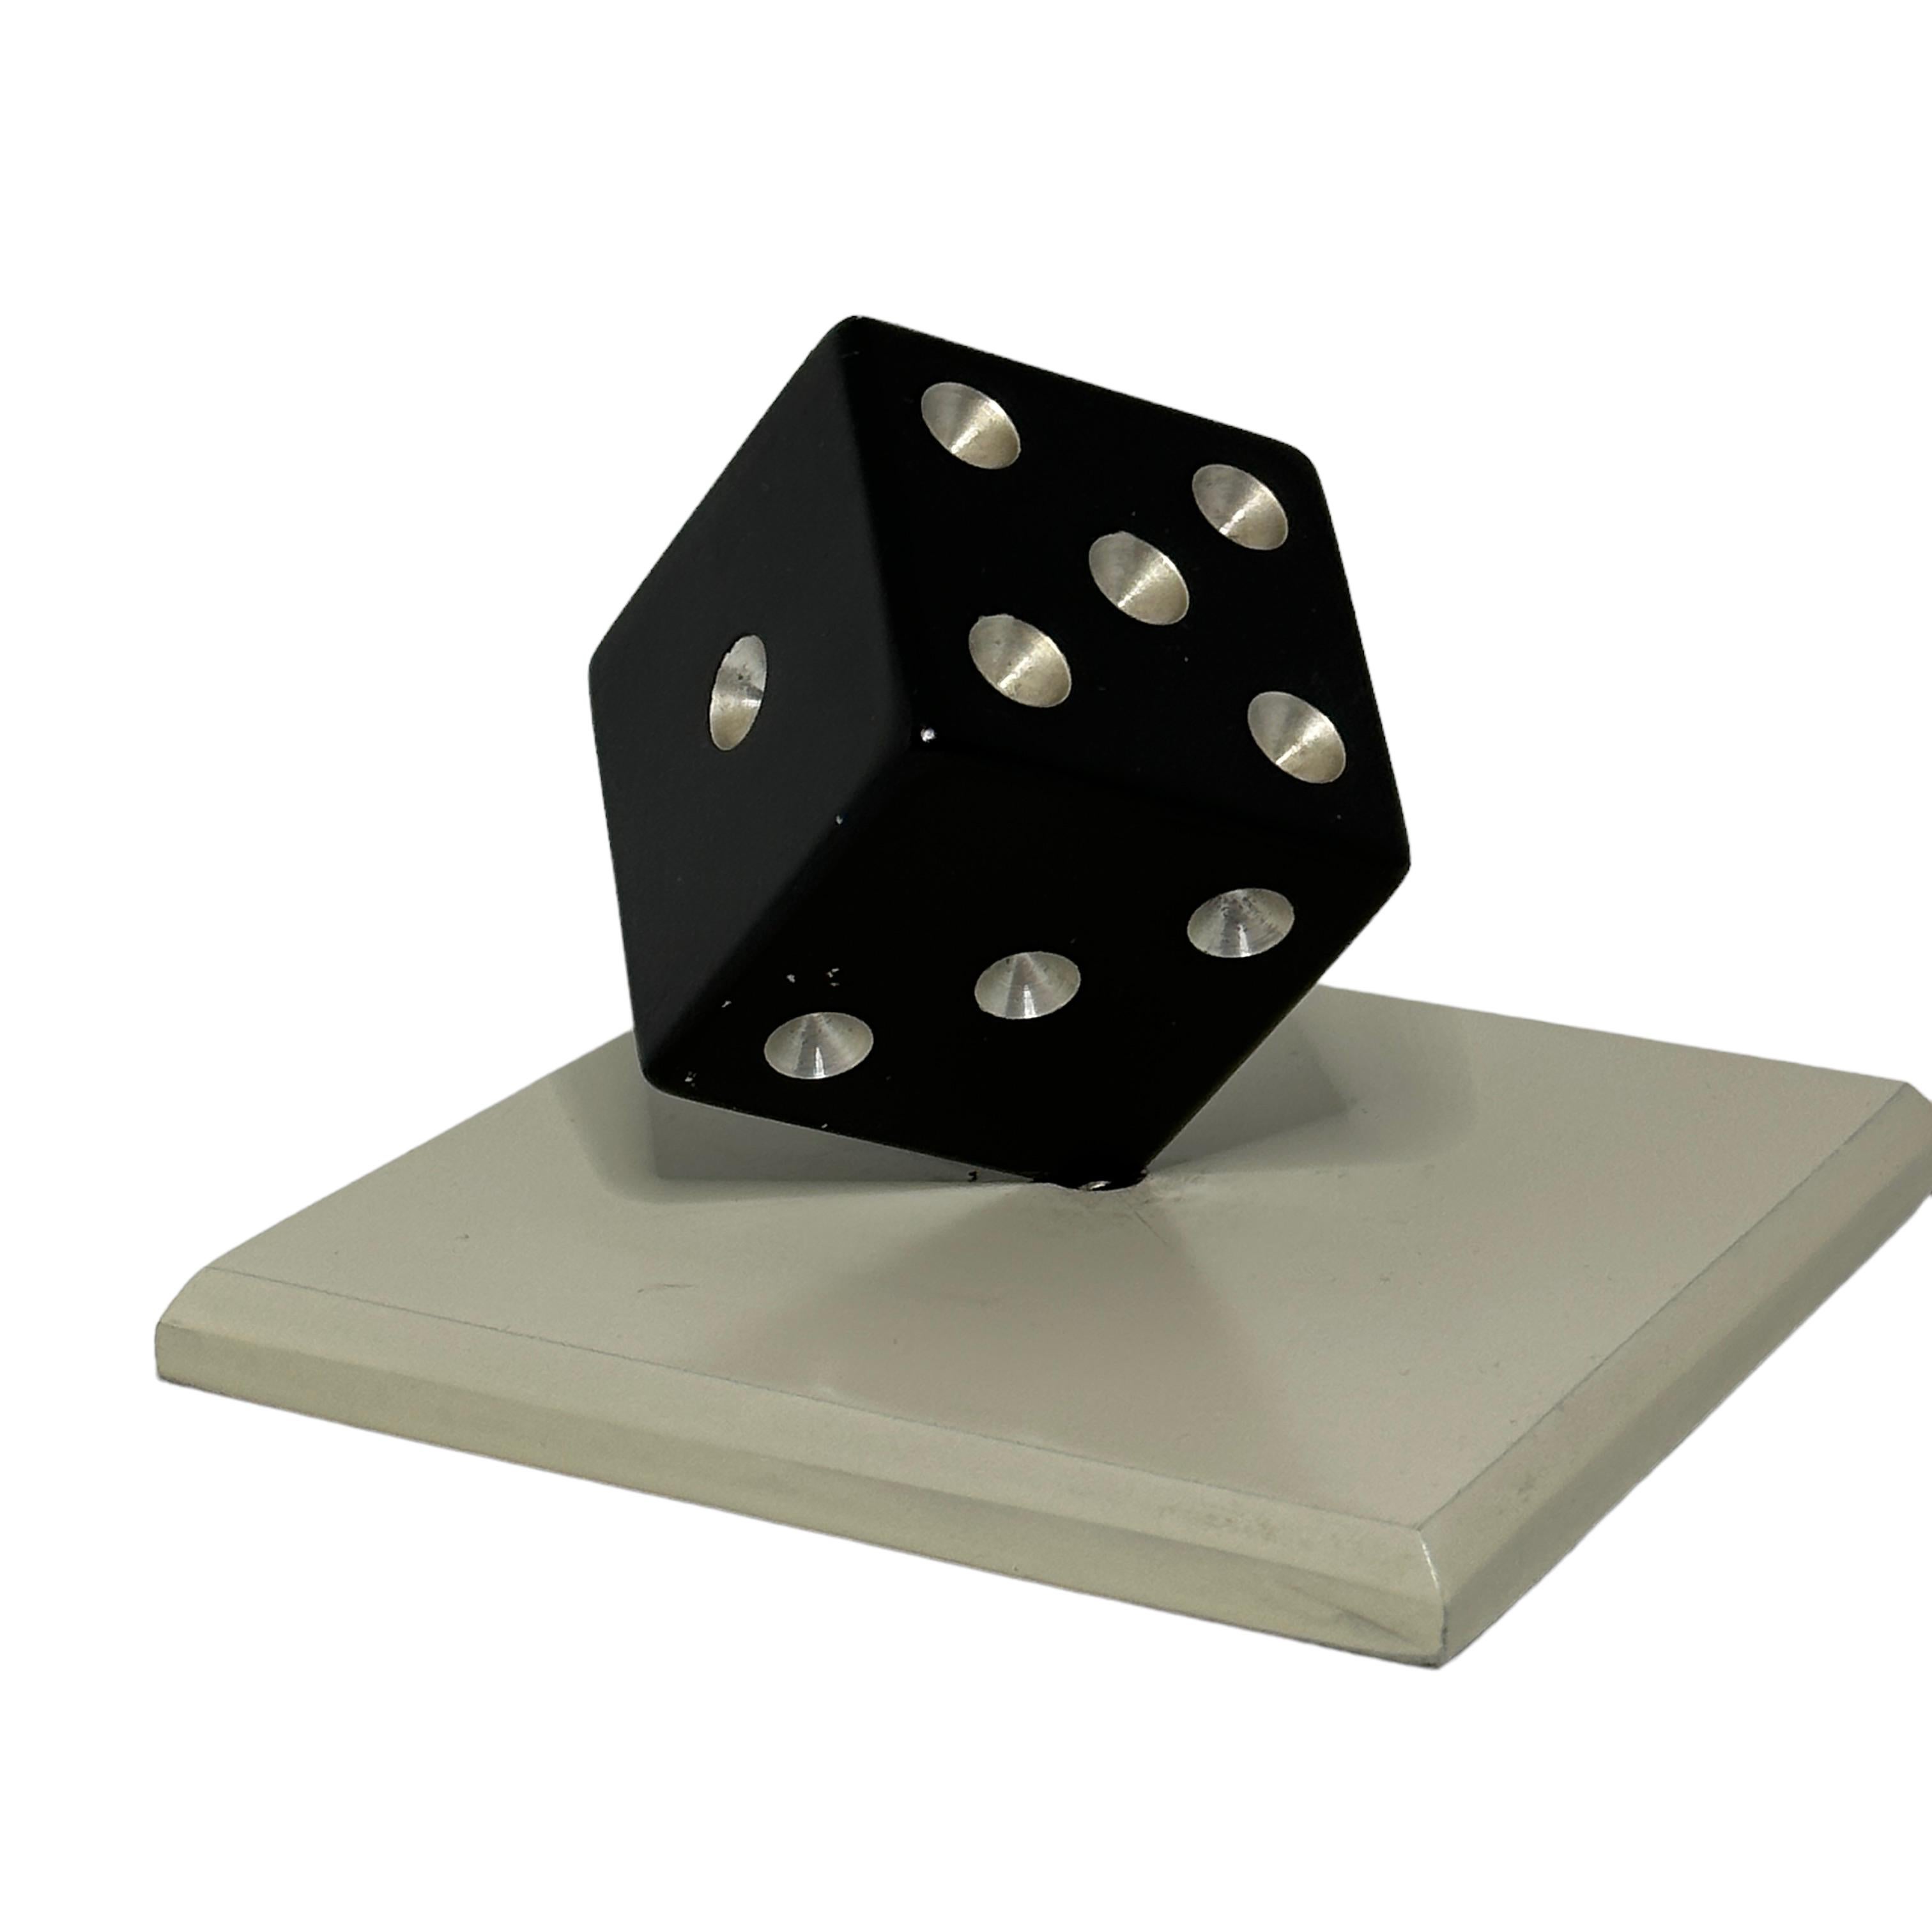 A german vintage aluminum paperweight or sculpture featuring a dice balanced on one corner. Art Deco style, inspired by the 1930s designs of Edgar Brandt. A minimalist dice sculpture which would grace any desk.
On the upper side of the dice are the